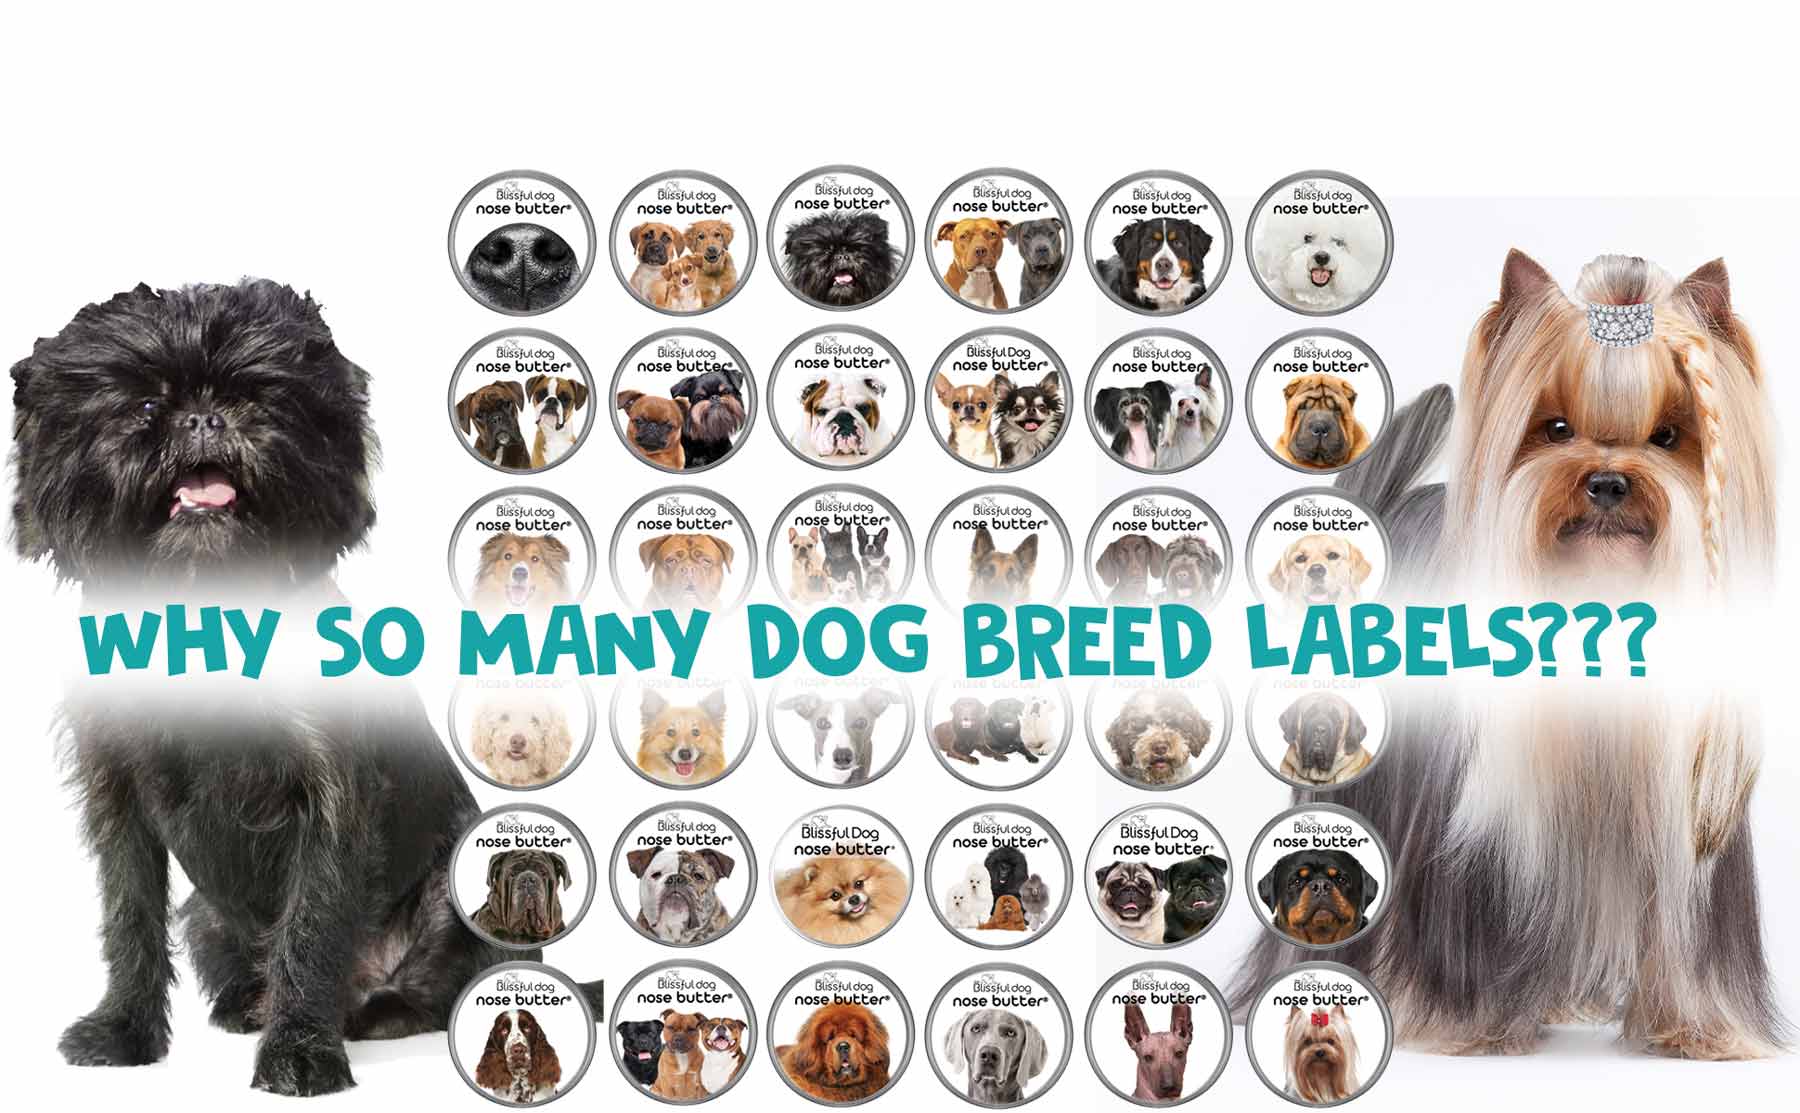 DOG BREED LABELS